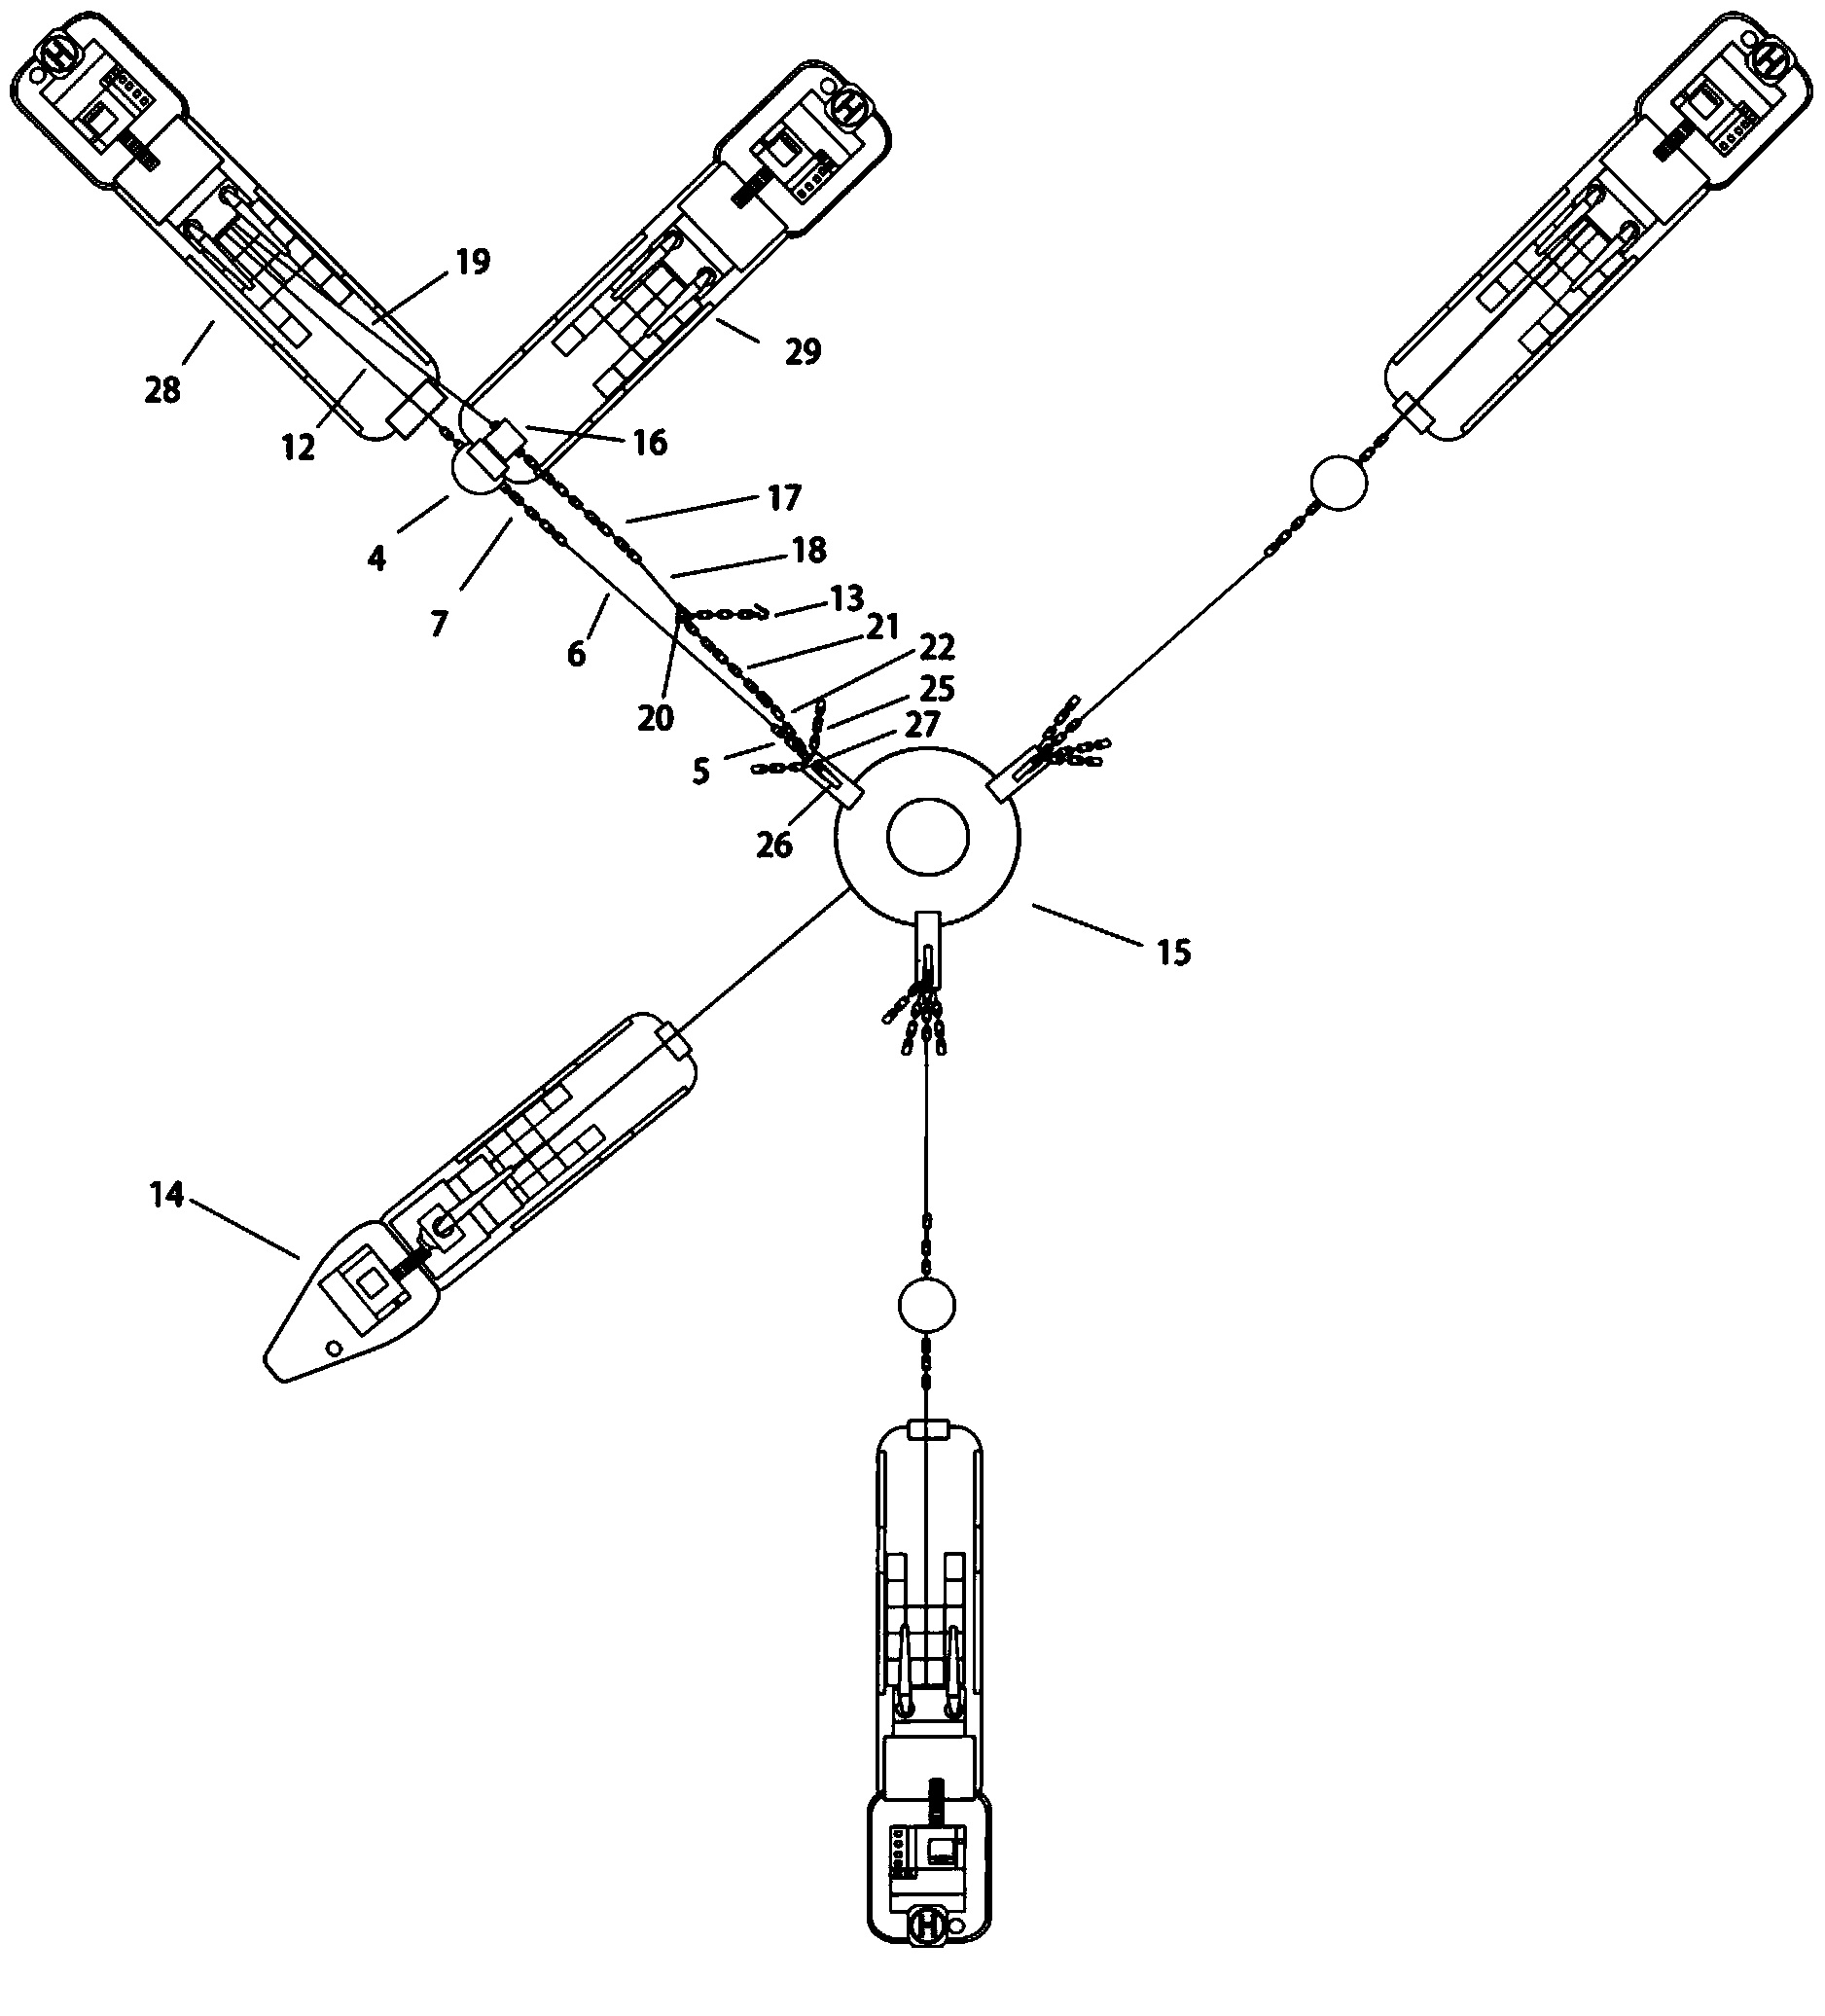 Method for mounting submerged buoy in ultra-deep water